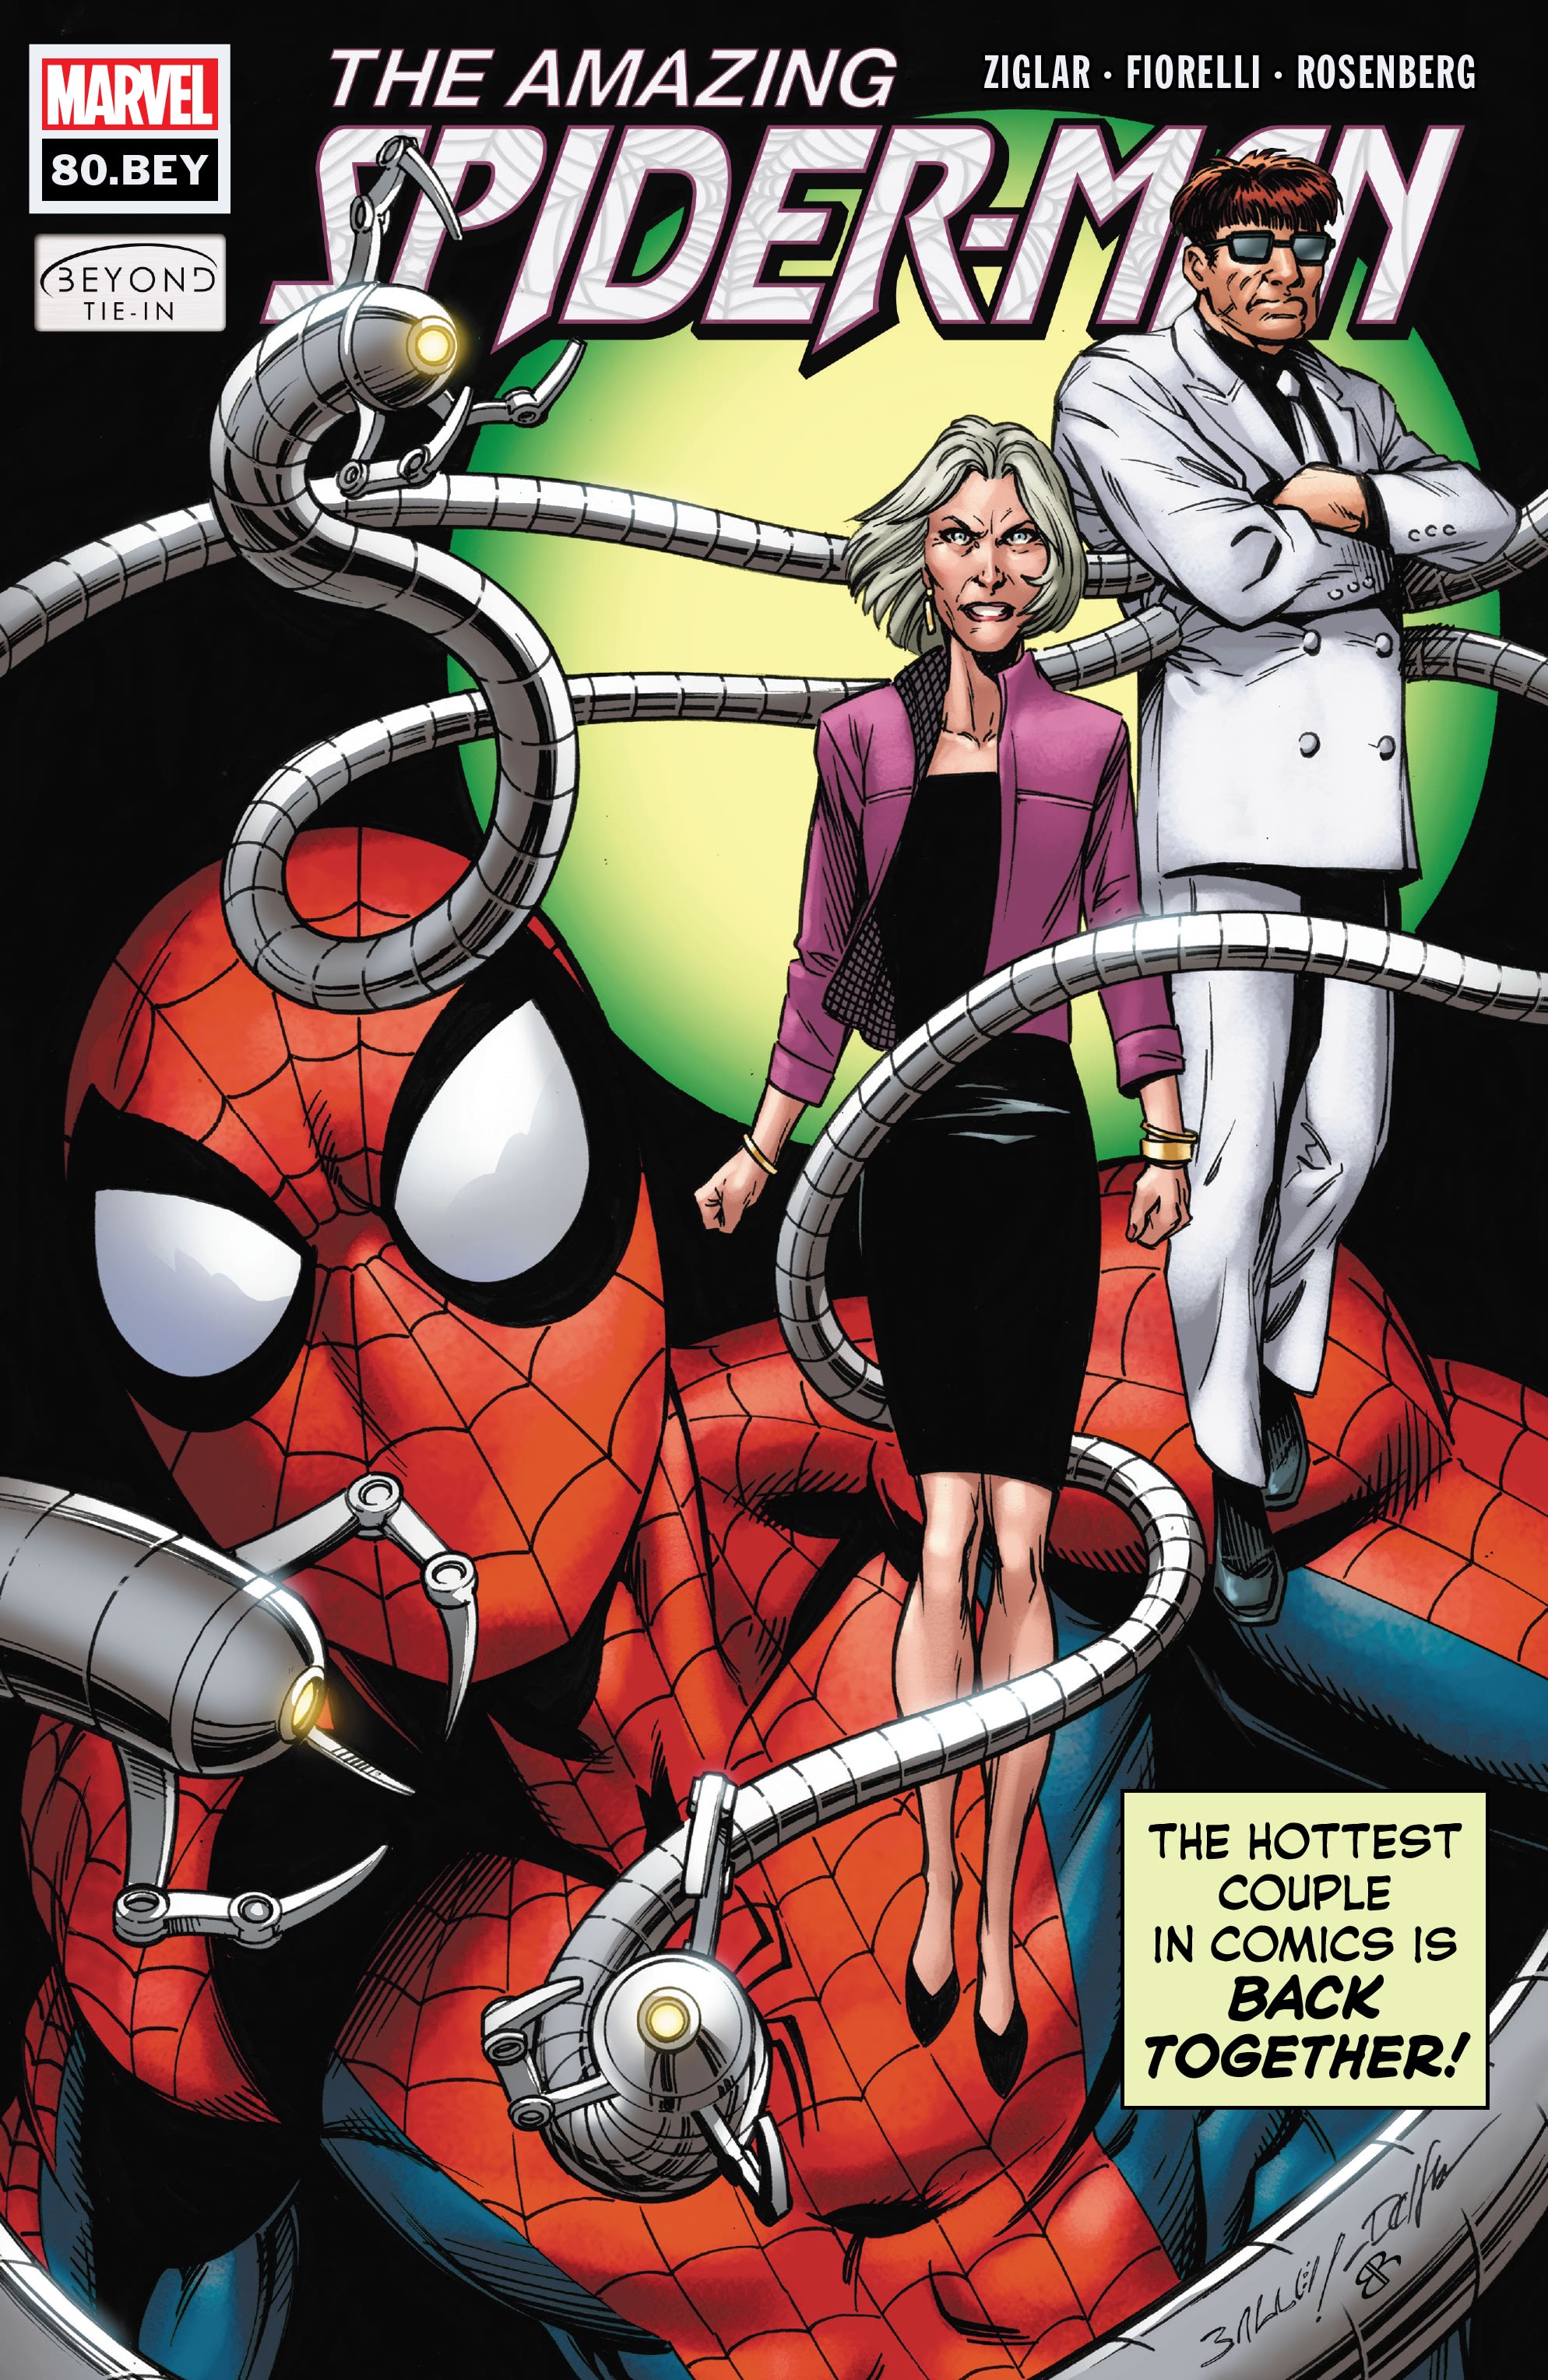 Read online The Amazing Spider-Man (2018) comic -  Issue #80.BEY - 1